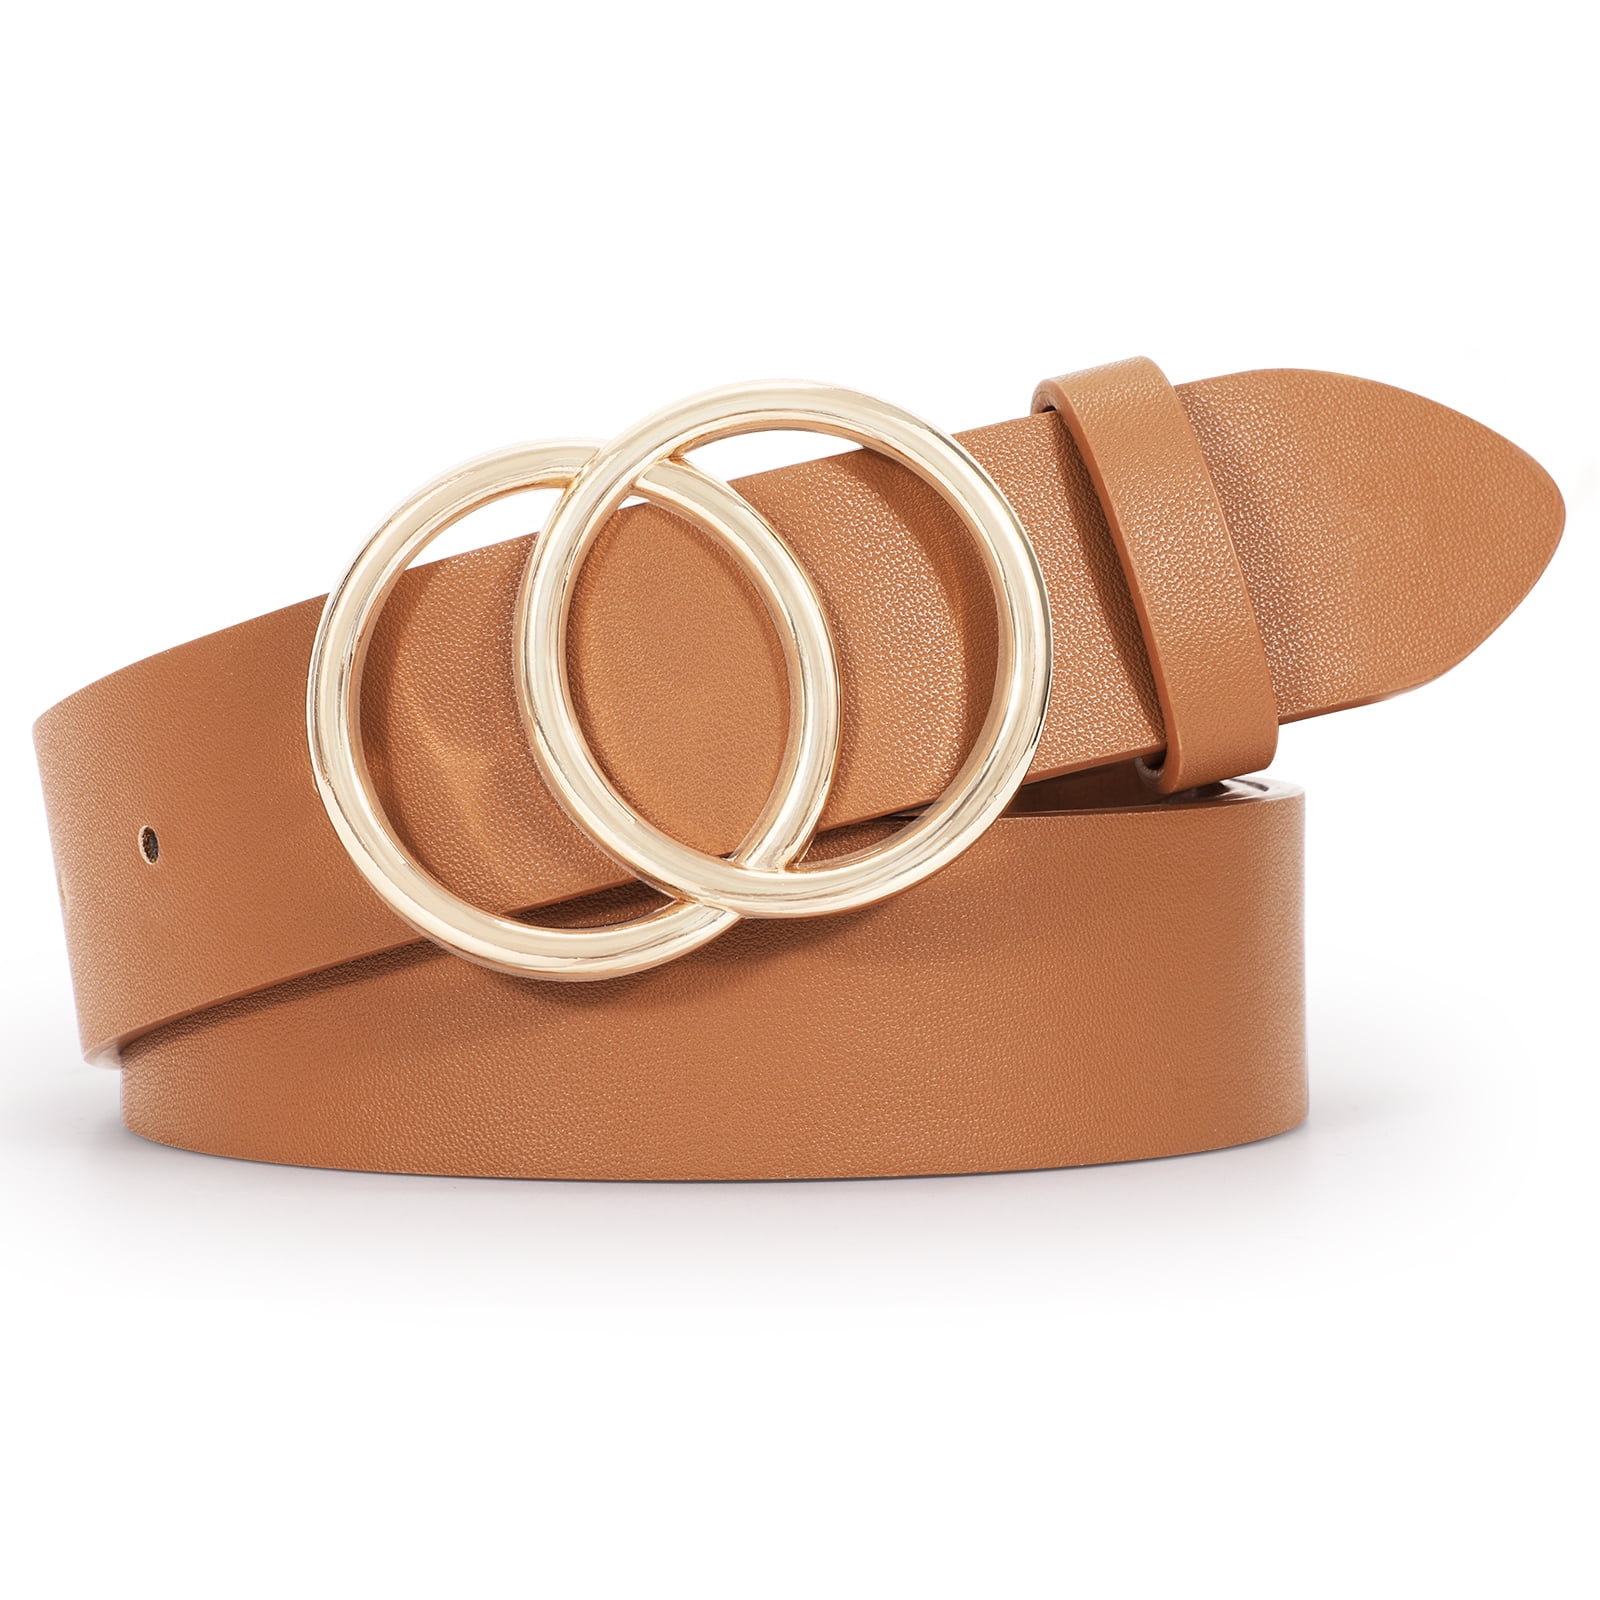 WHIPPY Women Leather Belt with Double Ring Buckle, Brown Waist